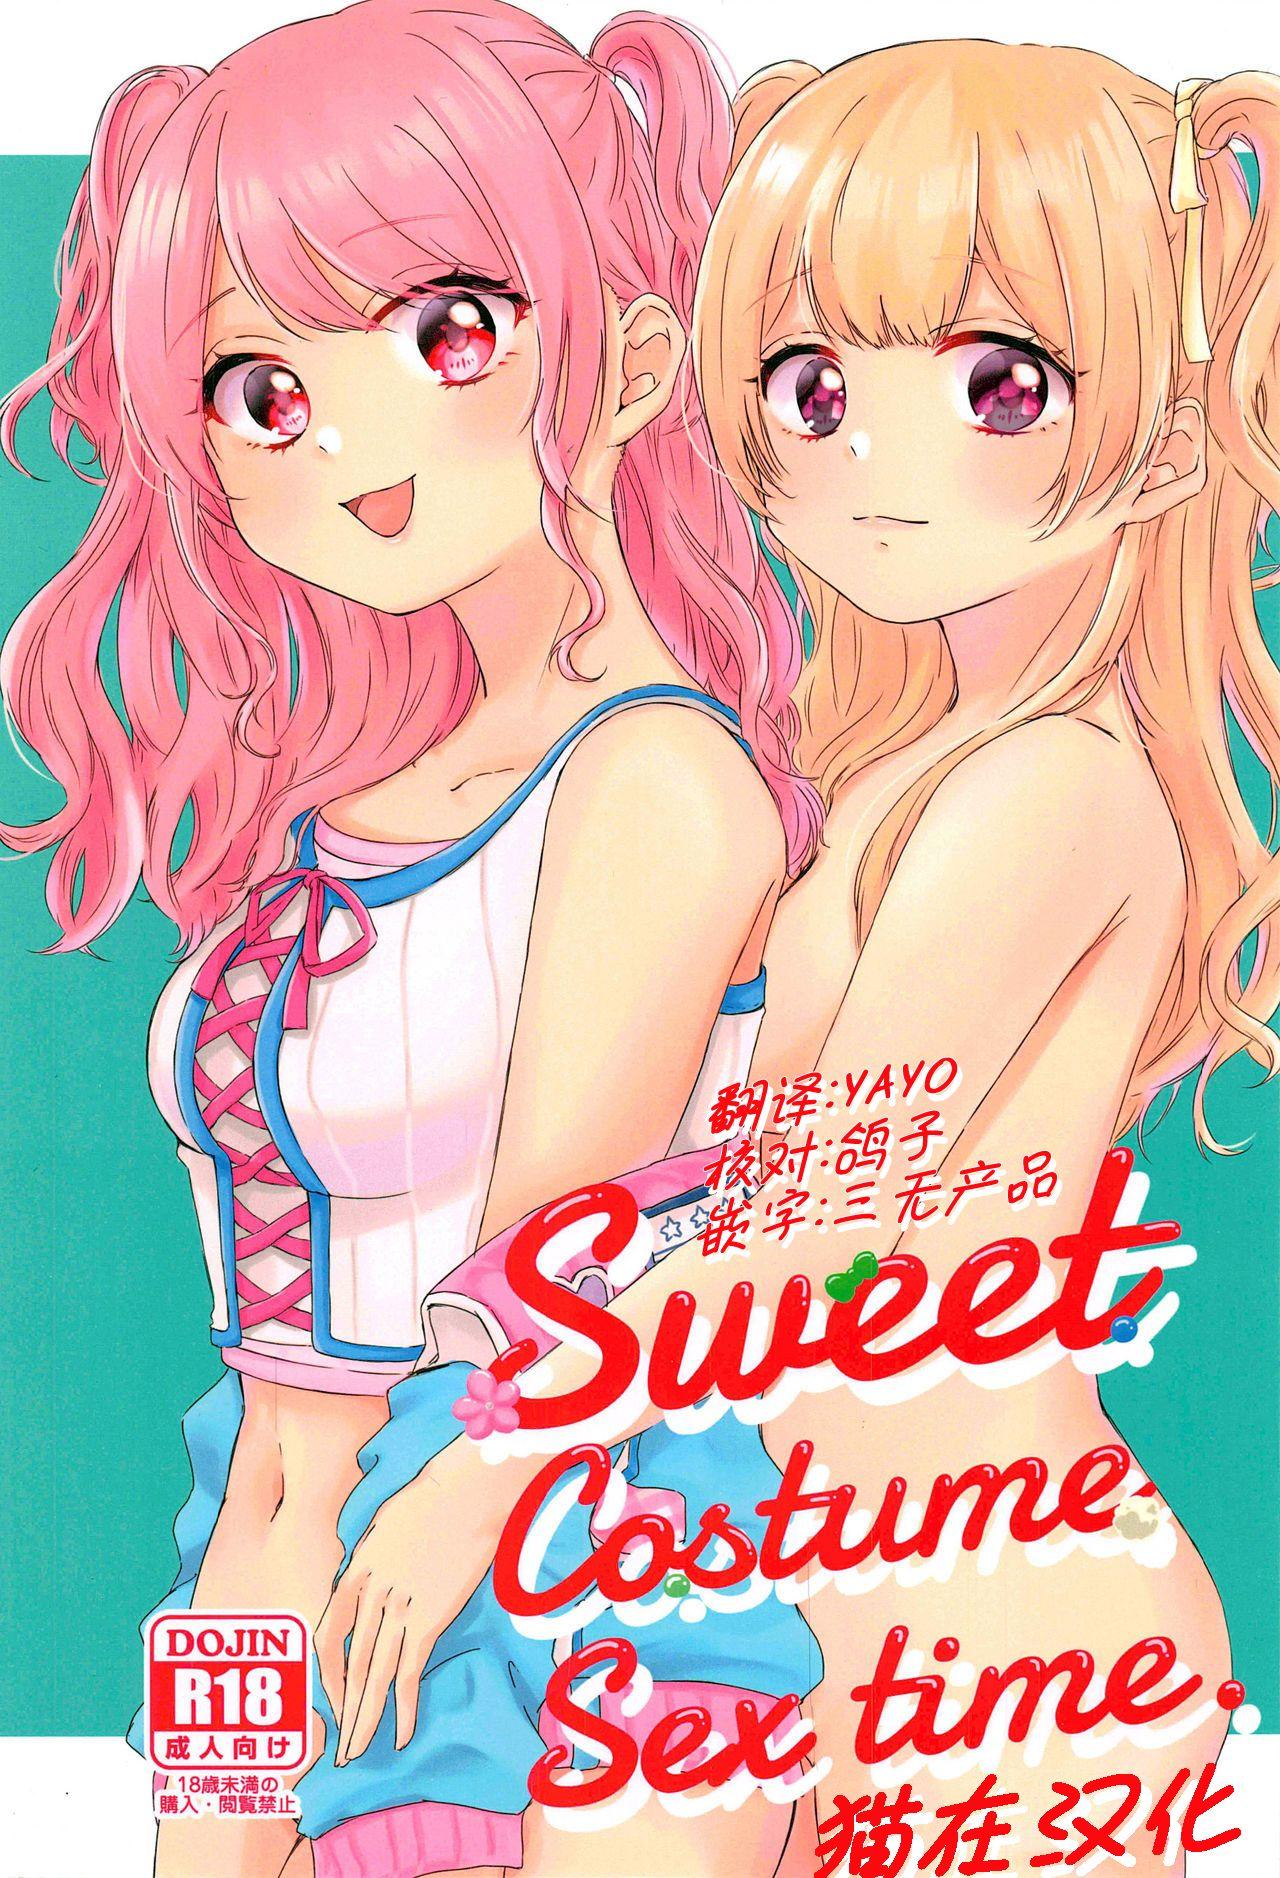 Model Sweet Costume Sex time. - Bang dream Sfm - Page 1